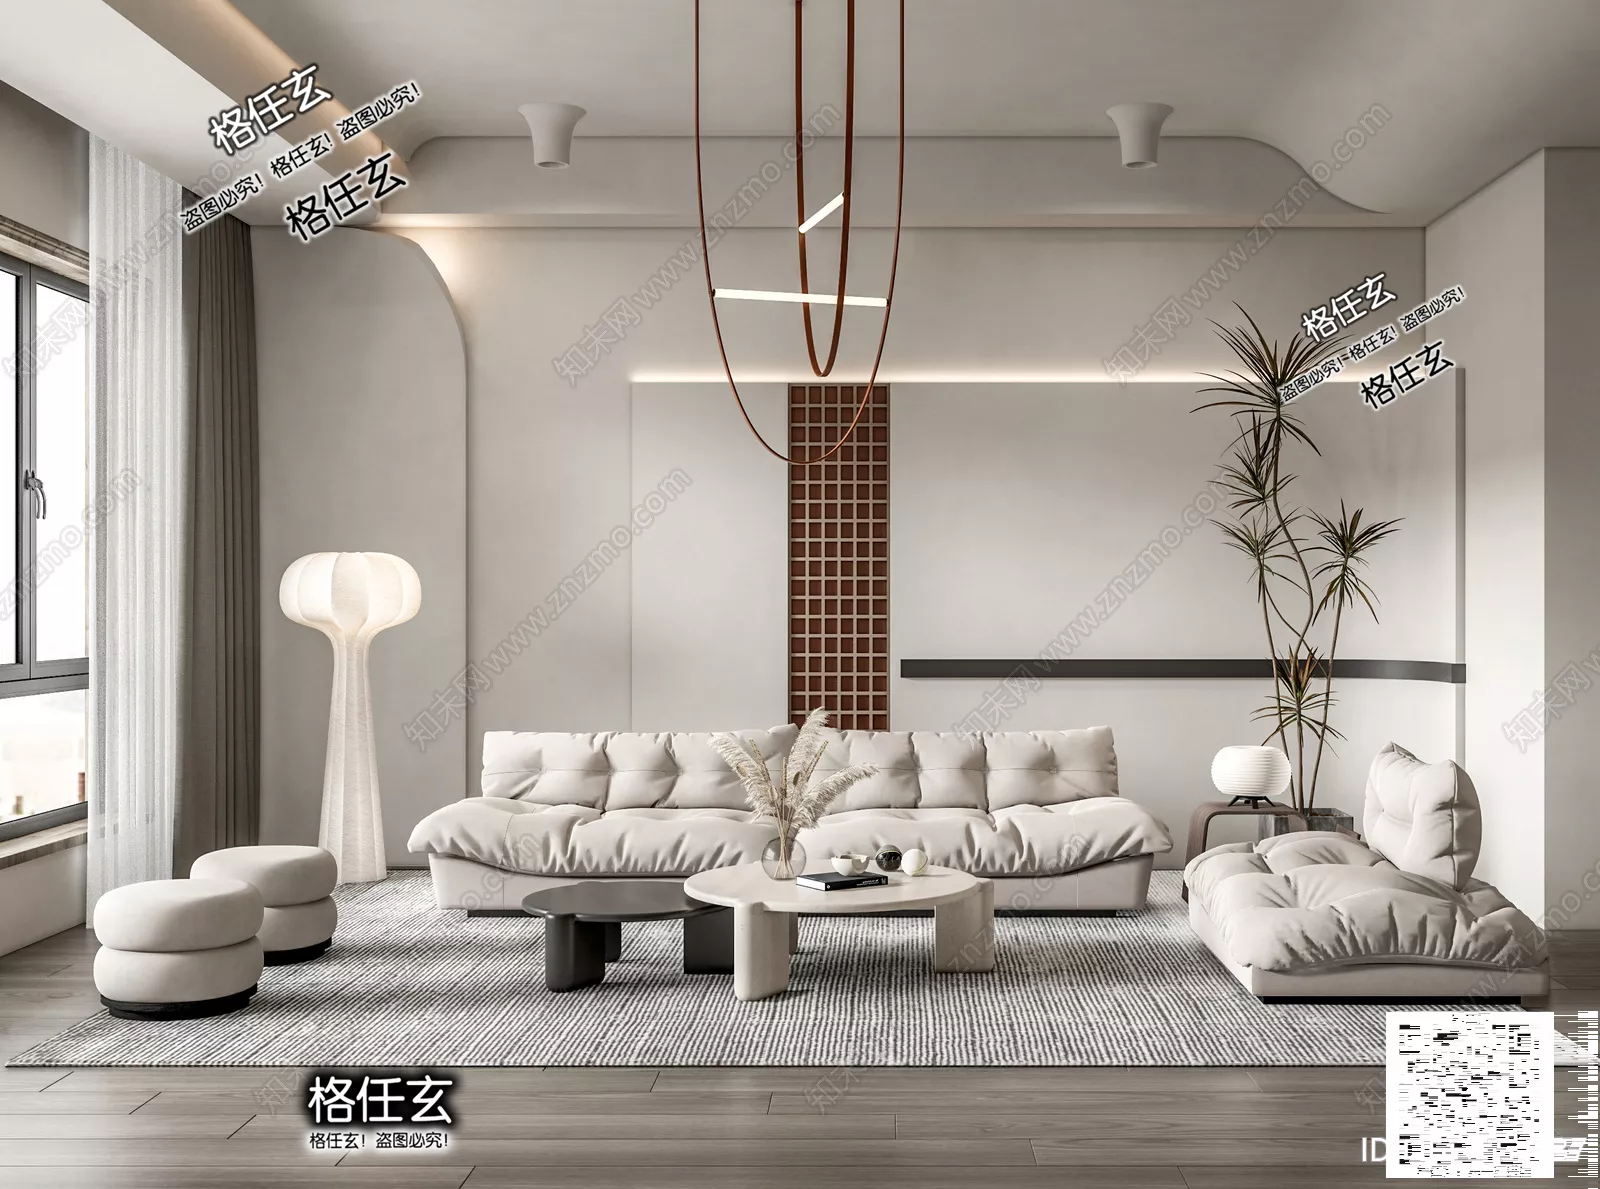 WABI SABI INTERIOR COLLECTION - SKETCHUP 3D SCENE - VRAY OR ENSCAPE - ID17766